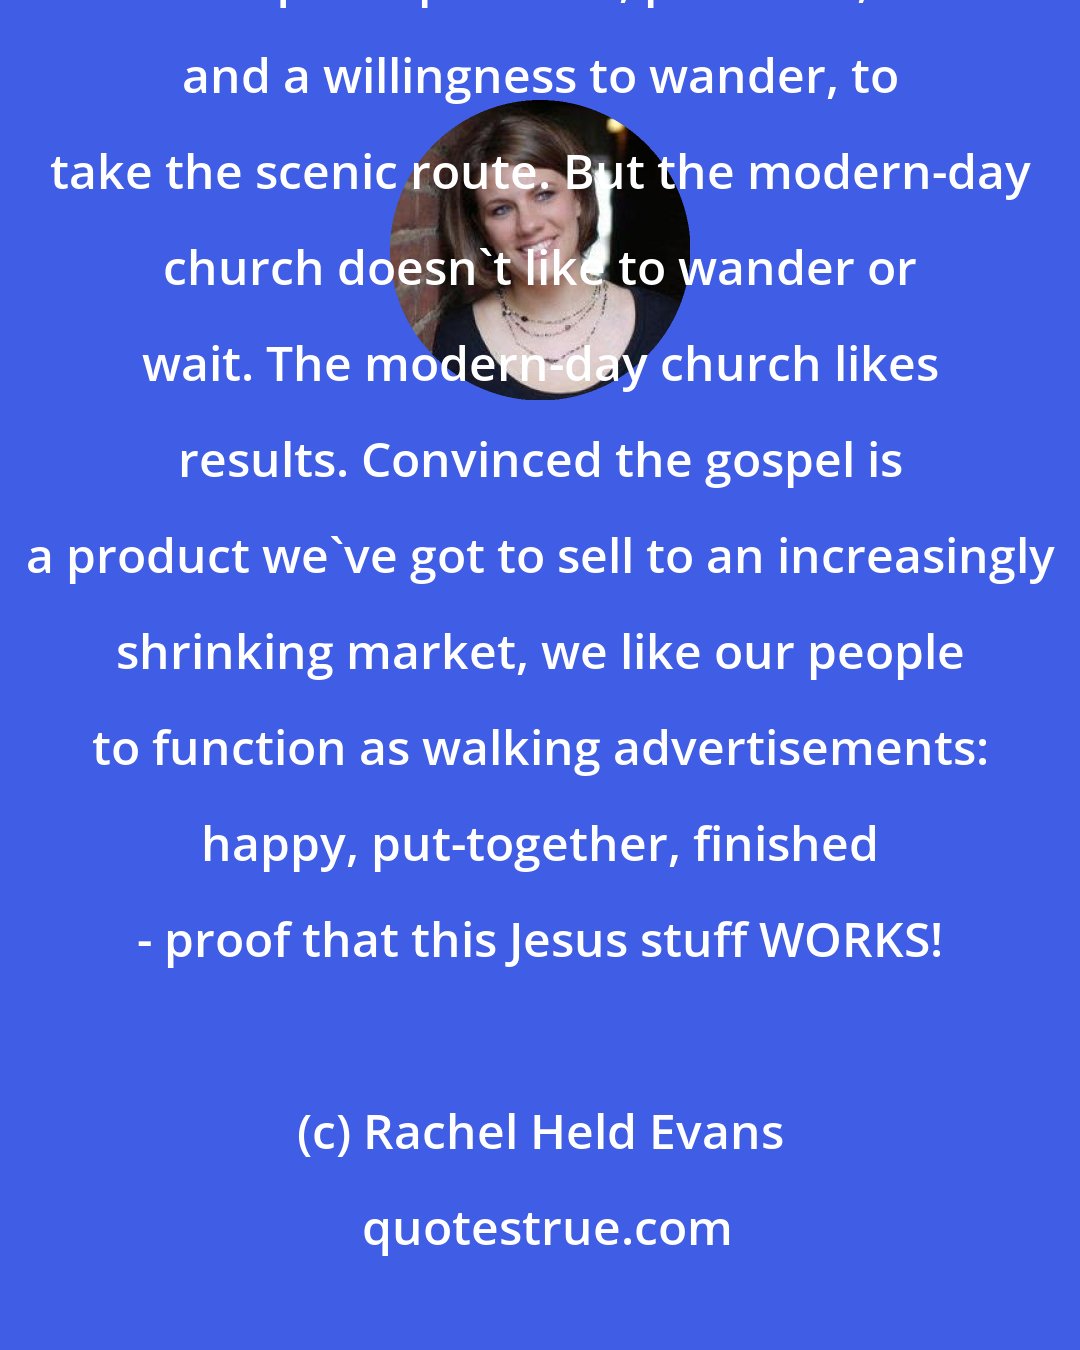 Rachel Held Evans: Walking with someone through grief, or through the process of reconciliation, requires patience, presence, and a willingness to wander, to take the scenic route. But the modern-day church doesn't like to wander or wait. The modern-day church likes results. Convinced the gospel is a product we've got to sell to an increasingly shrinking market, we like our people to function as walking advertisements: happy, put-together, finished - proof that this Jesus stuff WORKS!